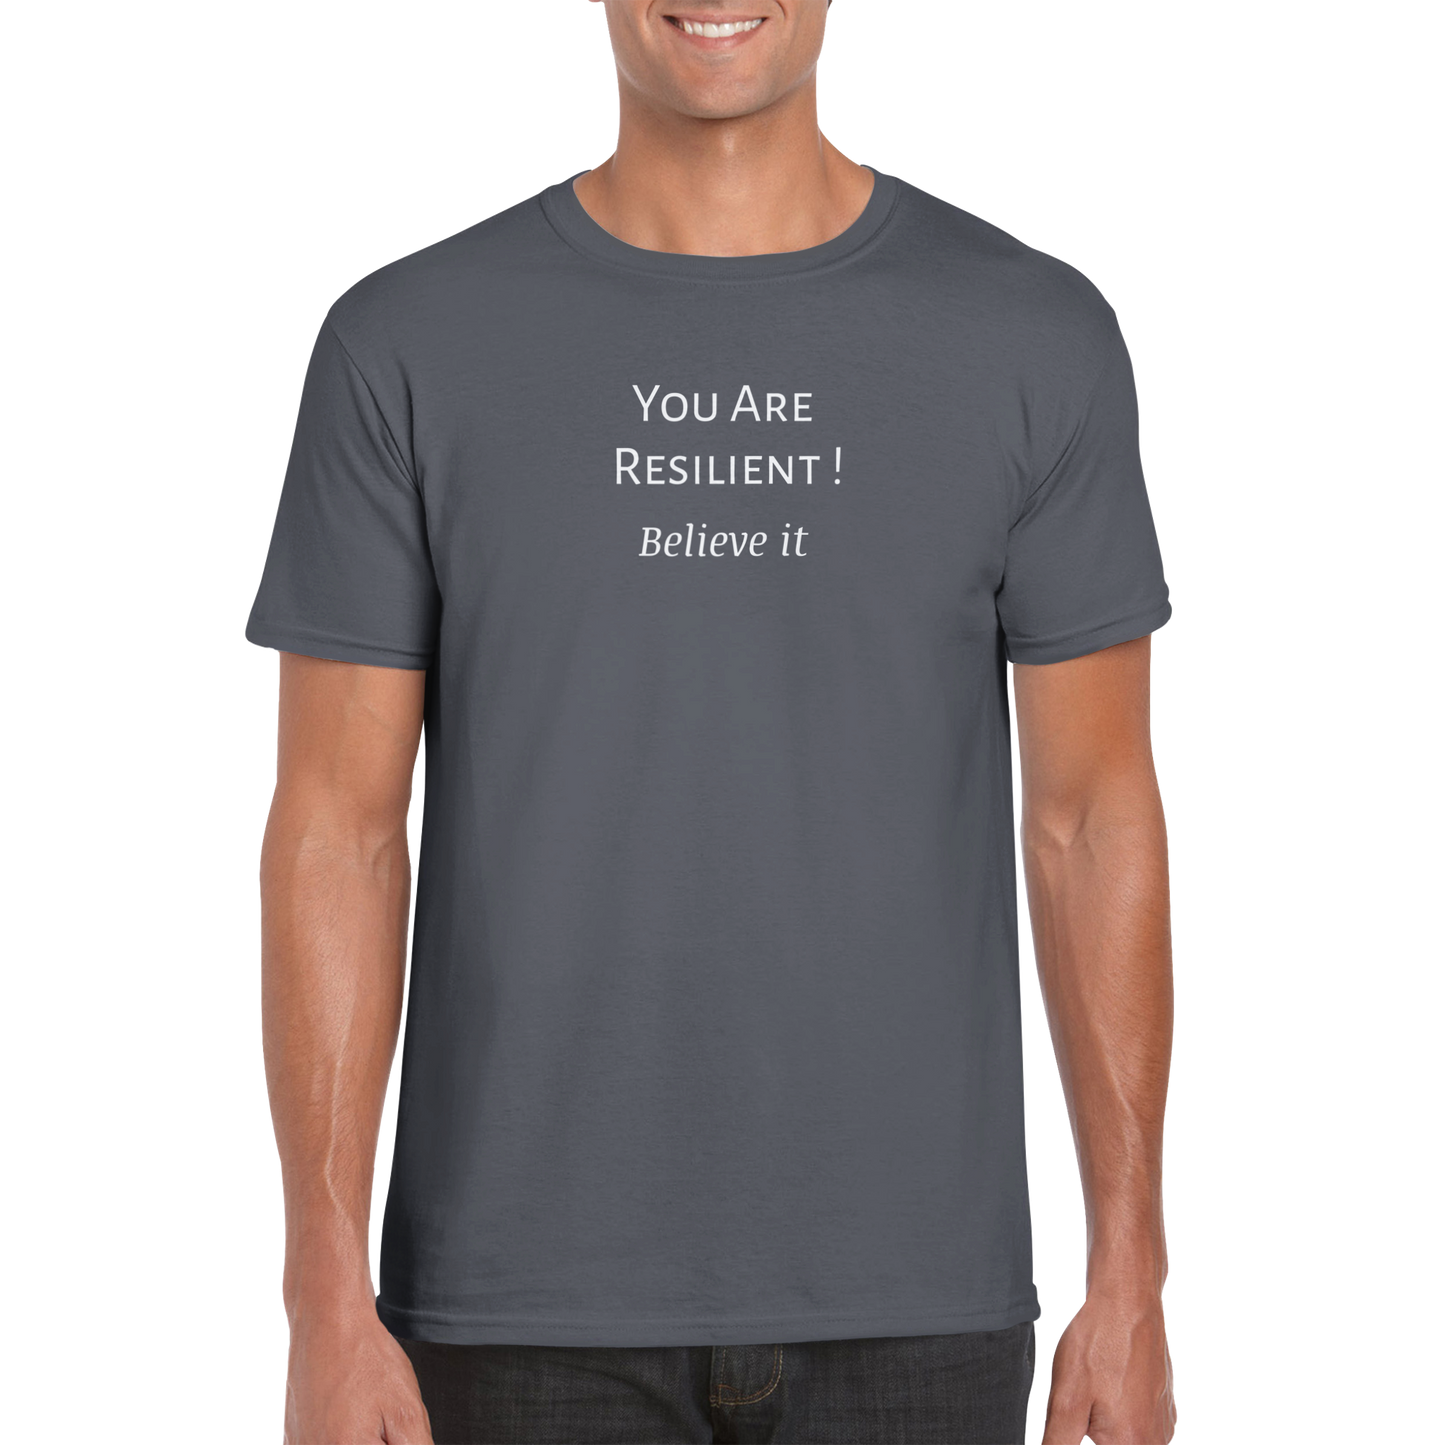 You Are Resilient! Classic Unisex Crewneck T-shirt. Wear it and share it forward.